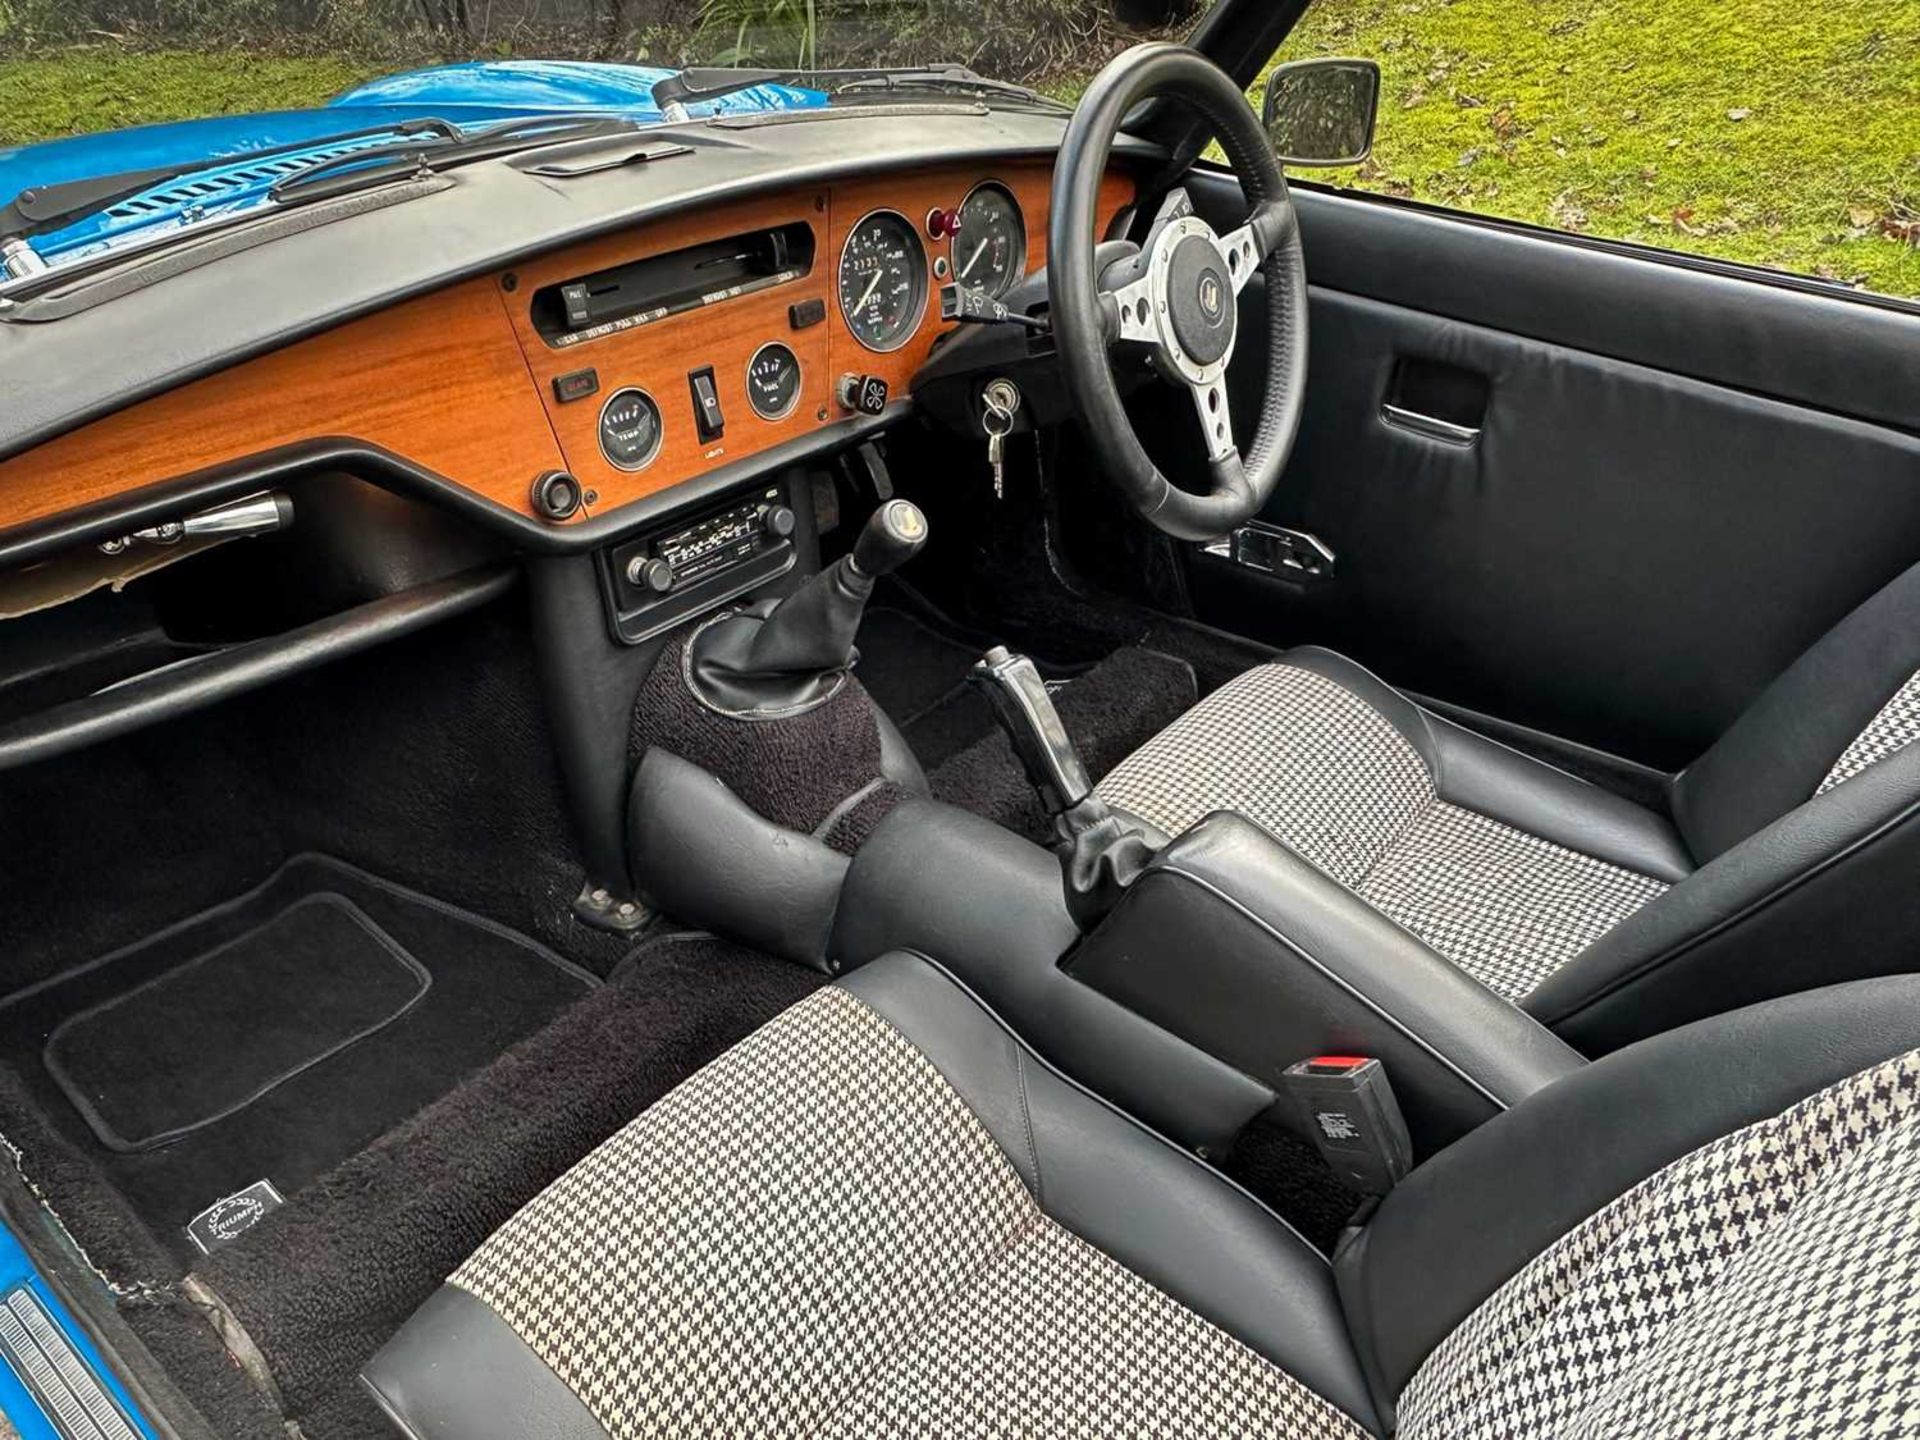 1981 Triumph Spitfire 1500 Comes with original bill of sale - Image 34 of 96